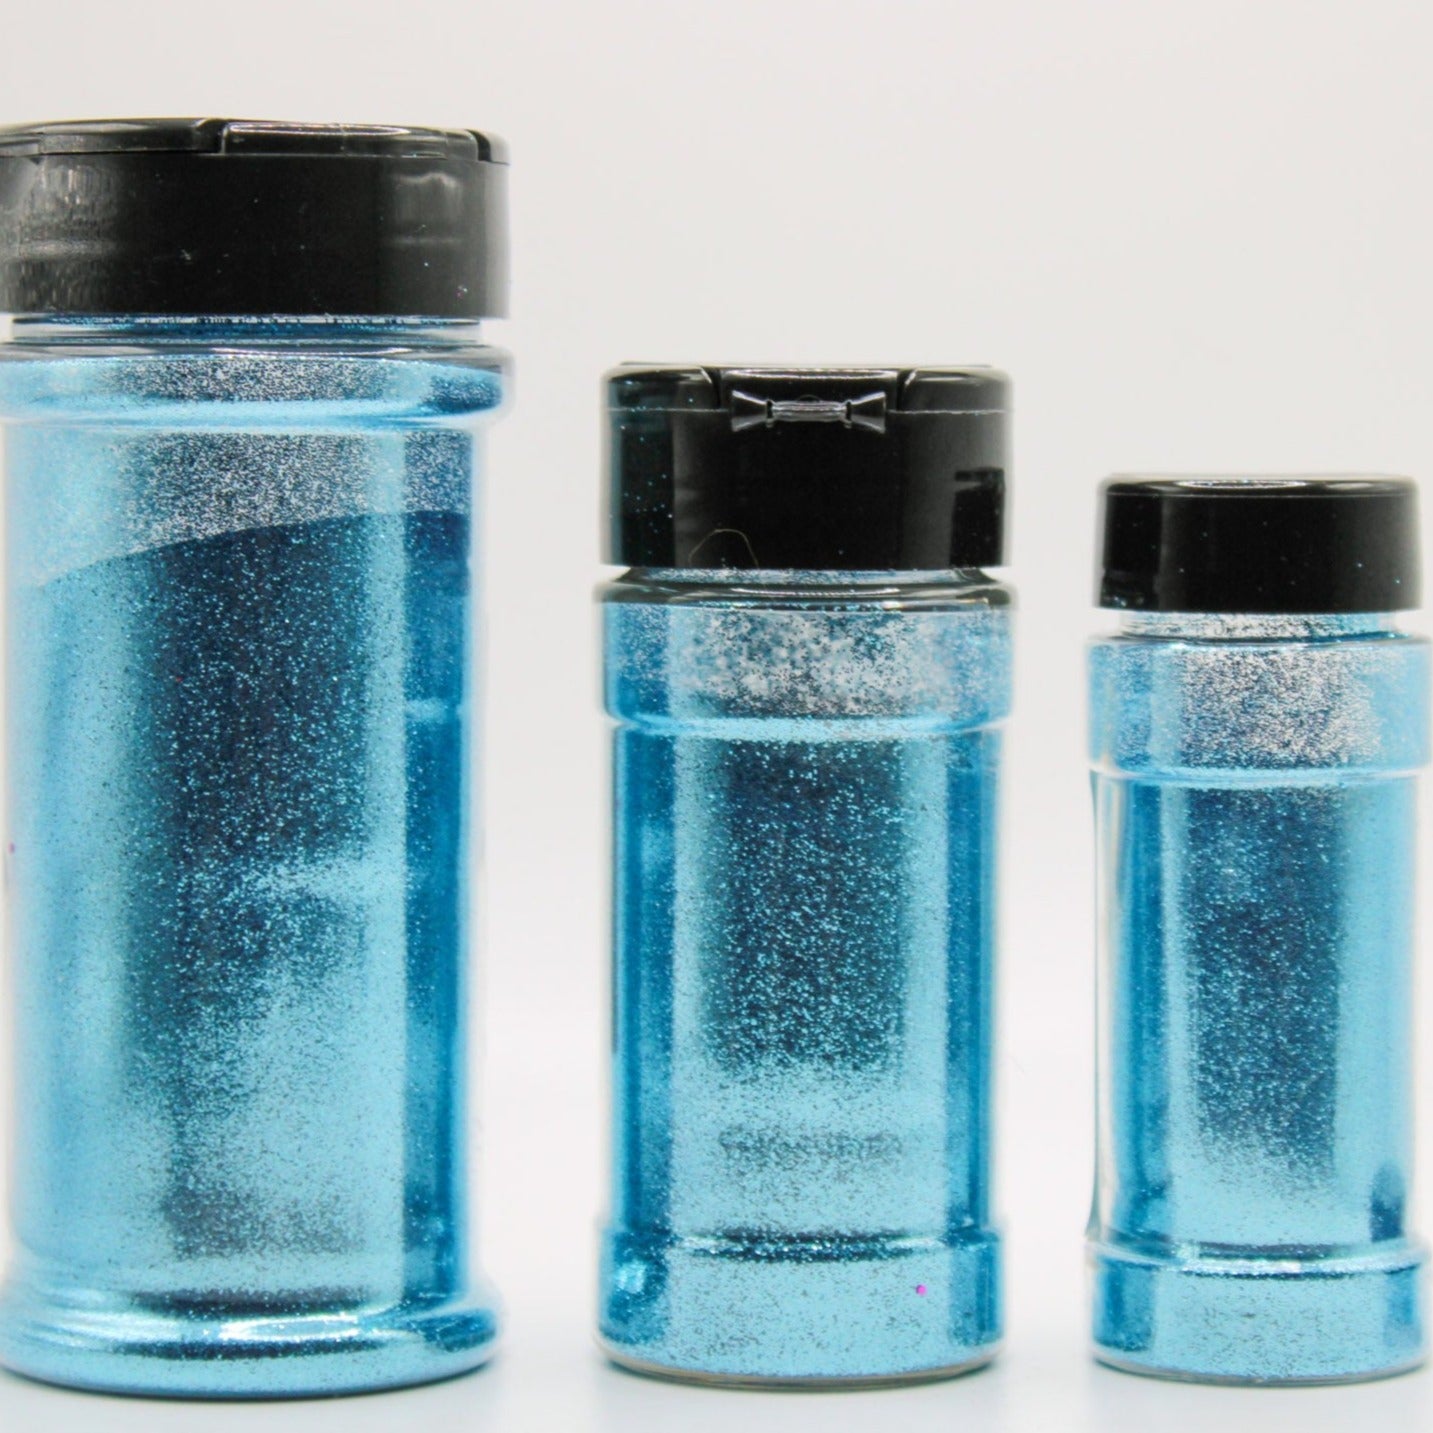 Airendale Blue :Ultra Fine Glitter Metallic (glitter sold by the pound)